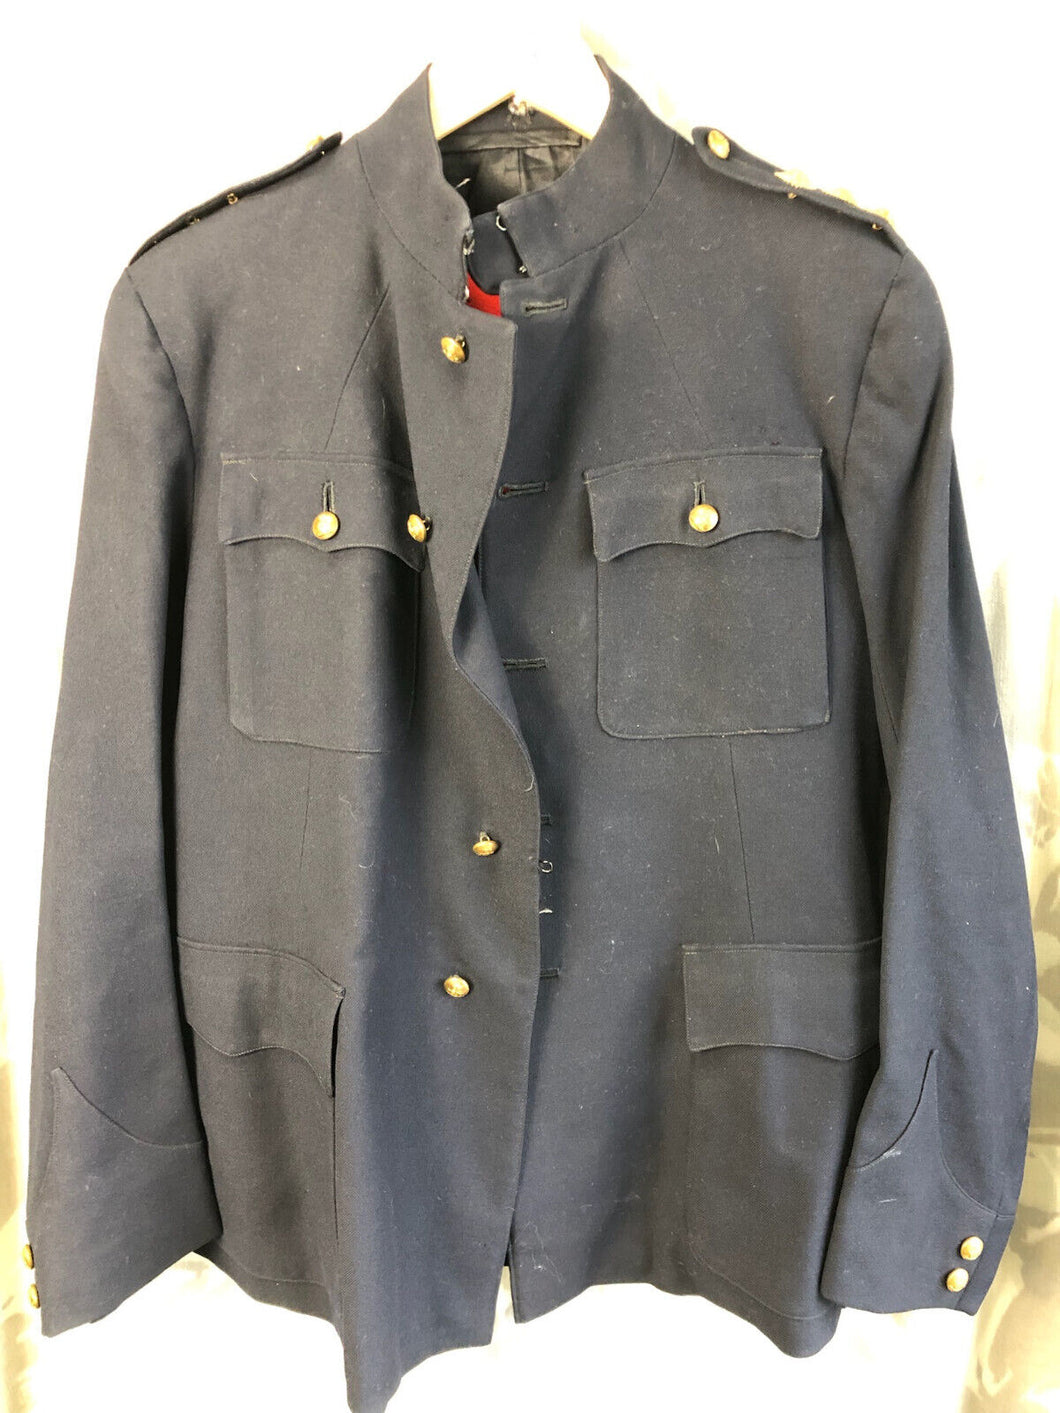 Original WW2 British Army Captains Dress Unifrom Jacket & Trousers Named